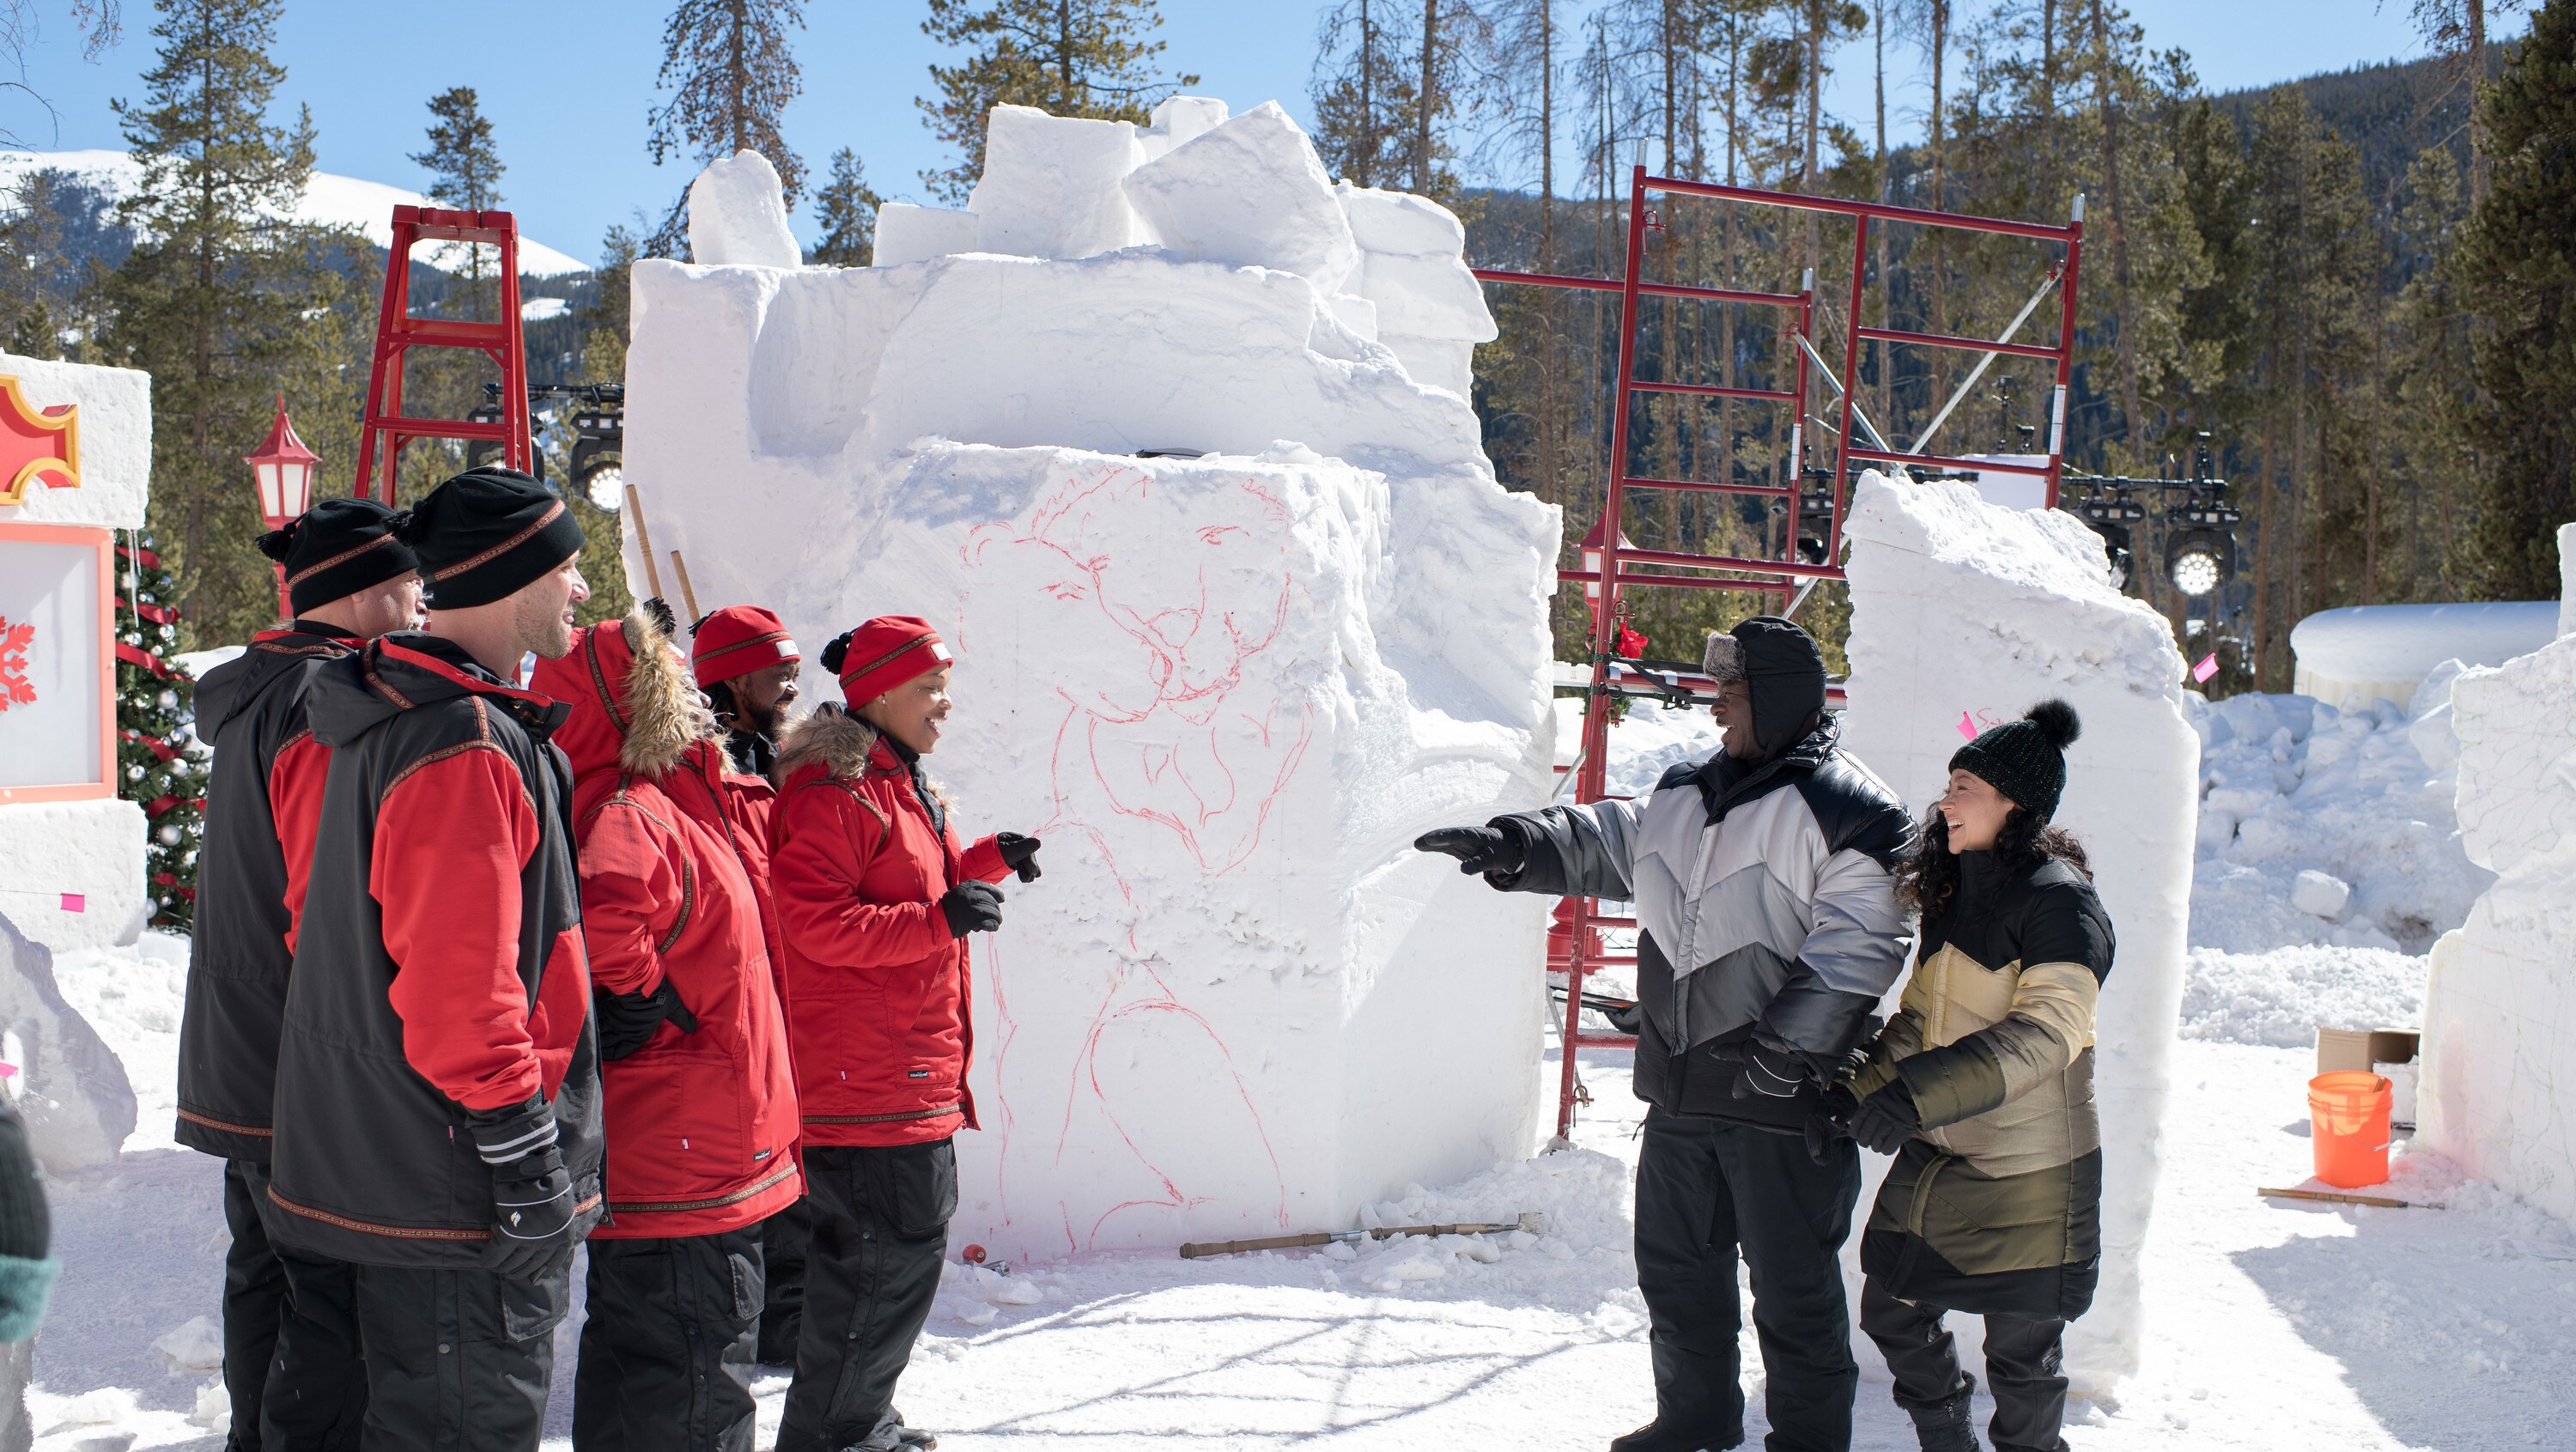 BEST IN SNOW. Judges Andre Rush and Sue McGrew speak with Team Hakuna Matata/Southern Snow. (Disney/Todd Wawrychuk)